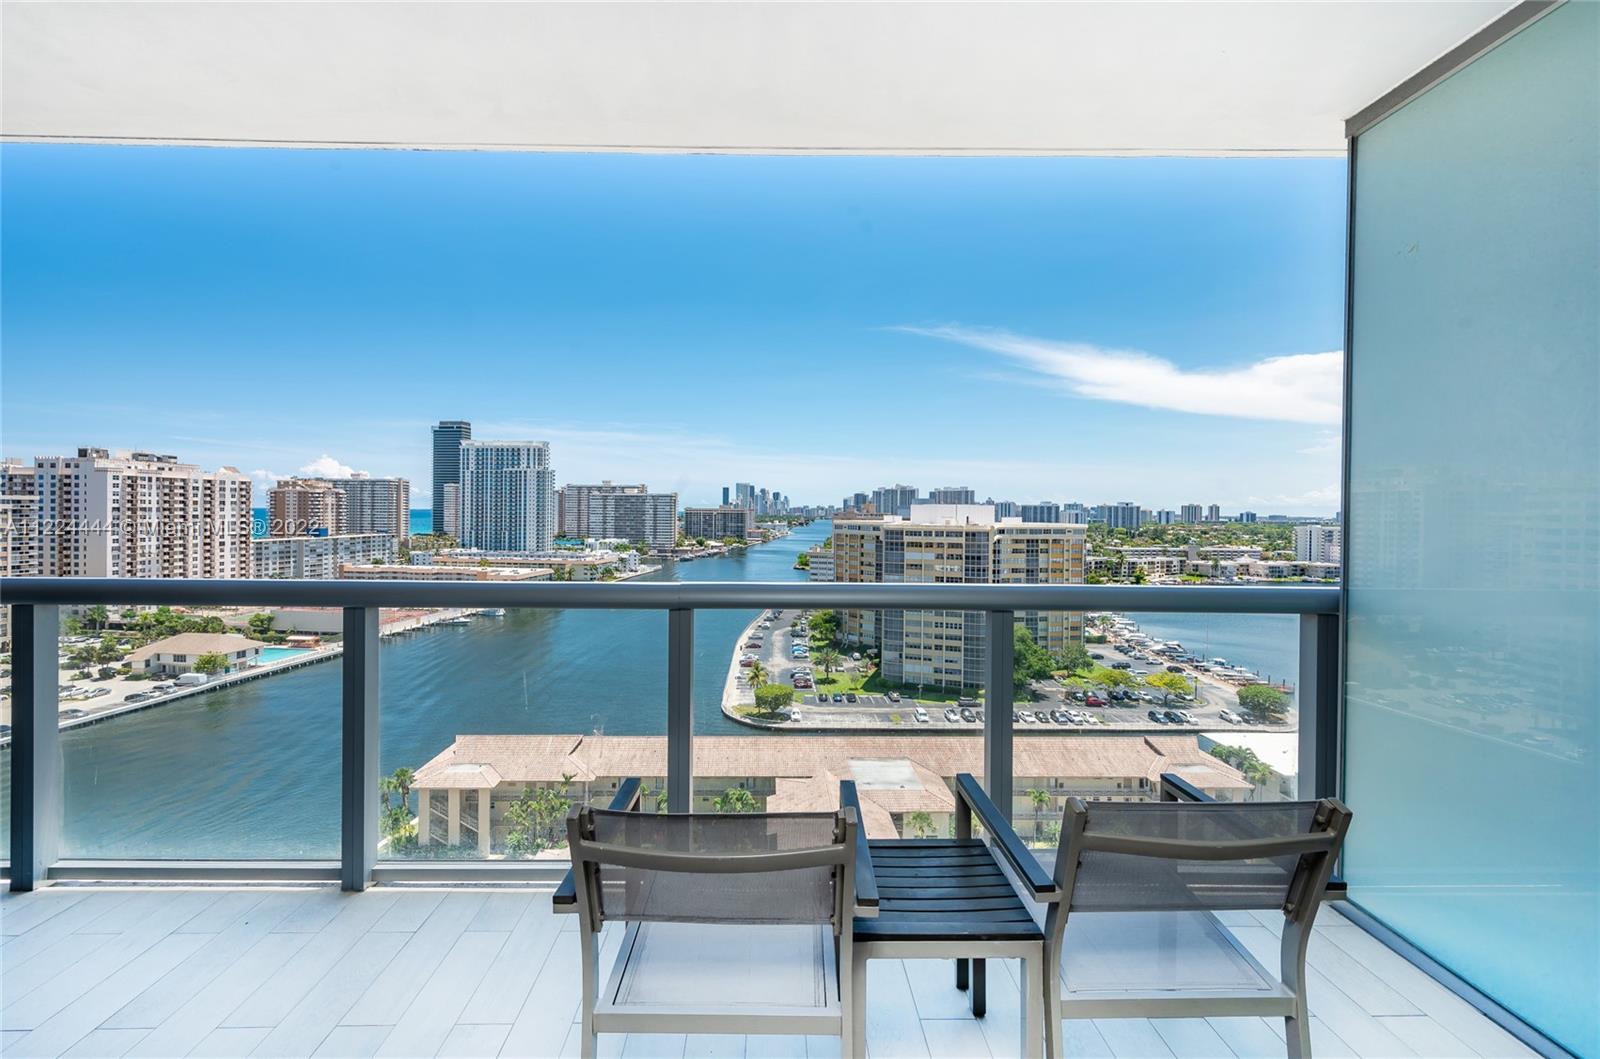 Breathtaking SOUTH views to  the INTRACOASTAL and the city skyline from this bright and  spacious tu